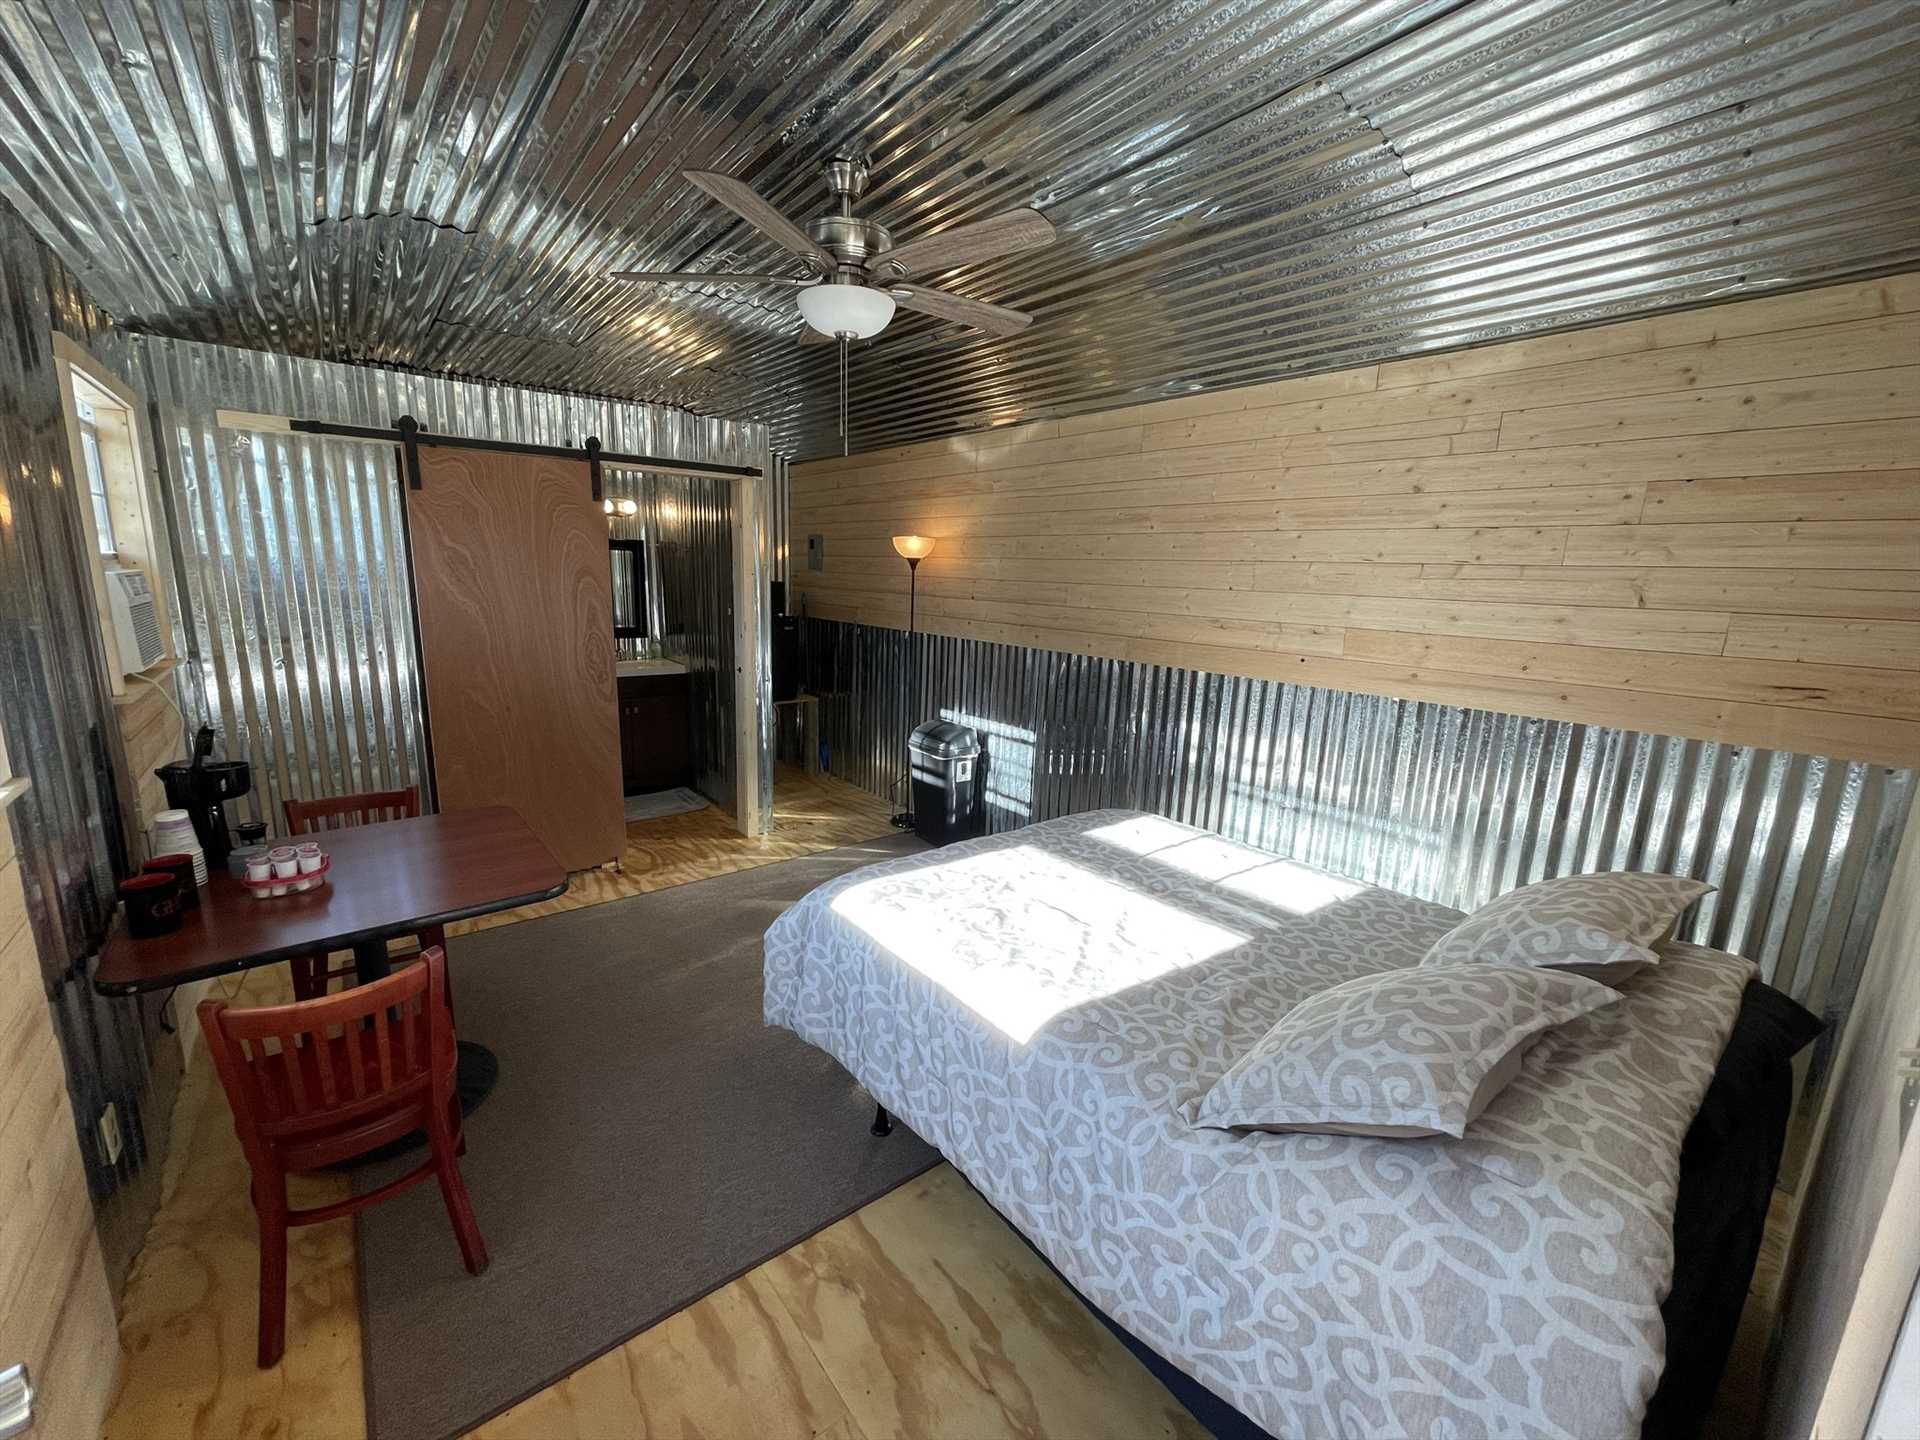                                                 The plush queen bed provides peaceful slumber in this romantic getaway, and a roll-away bed is also available for a third person upon request.